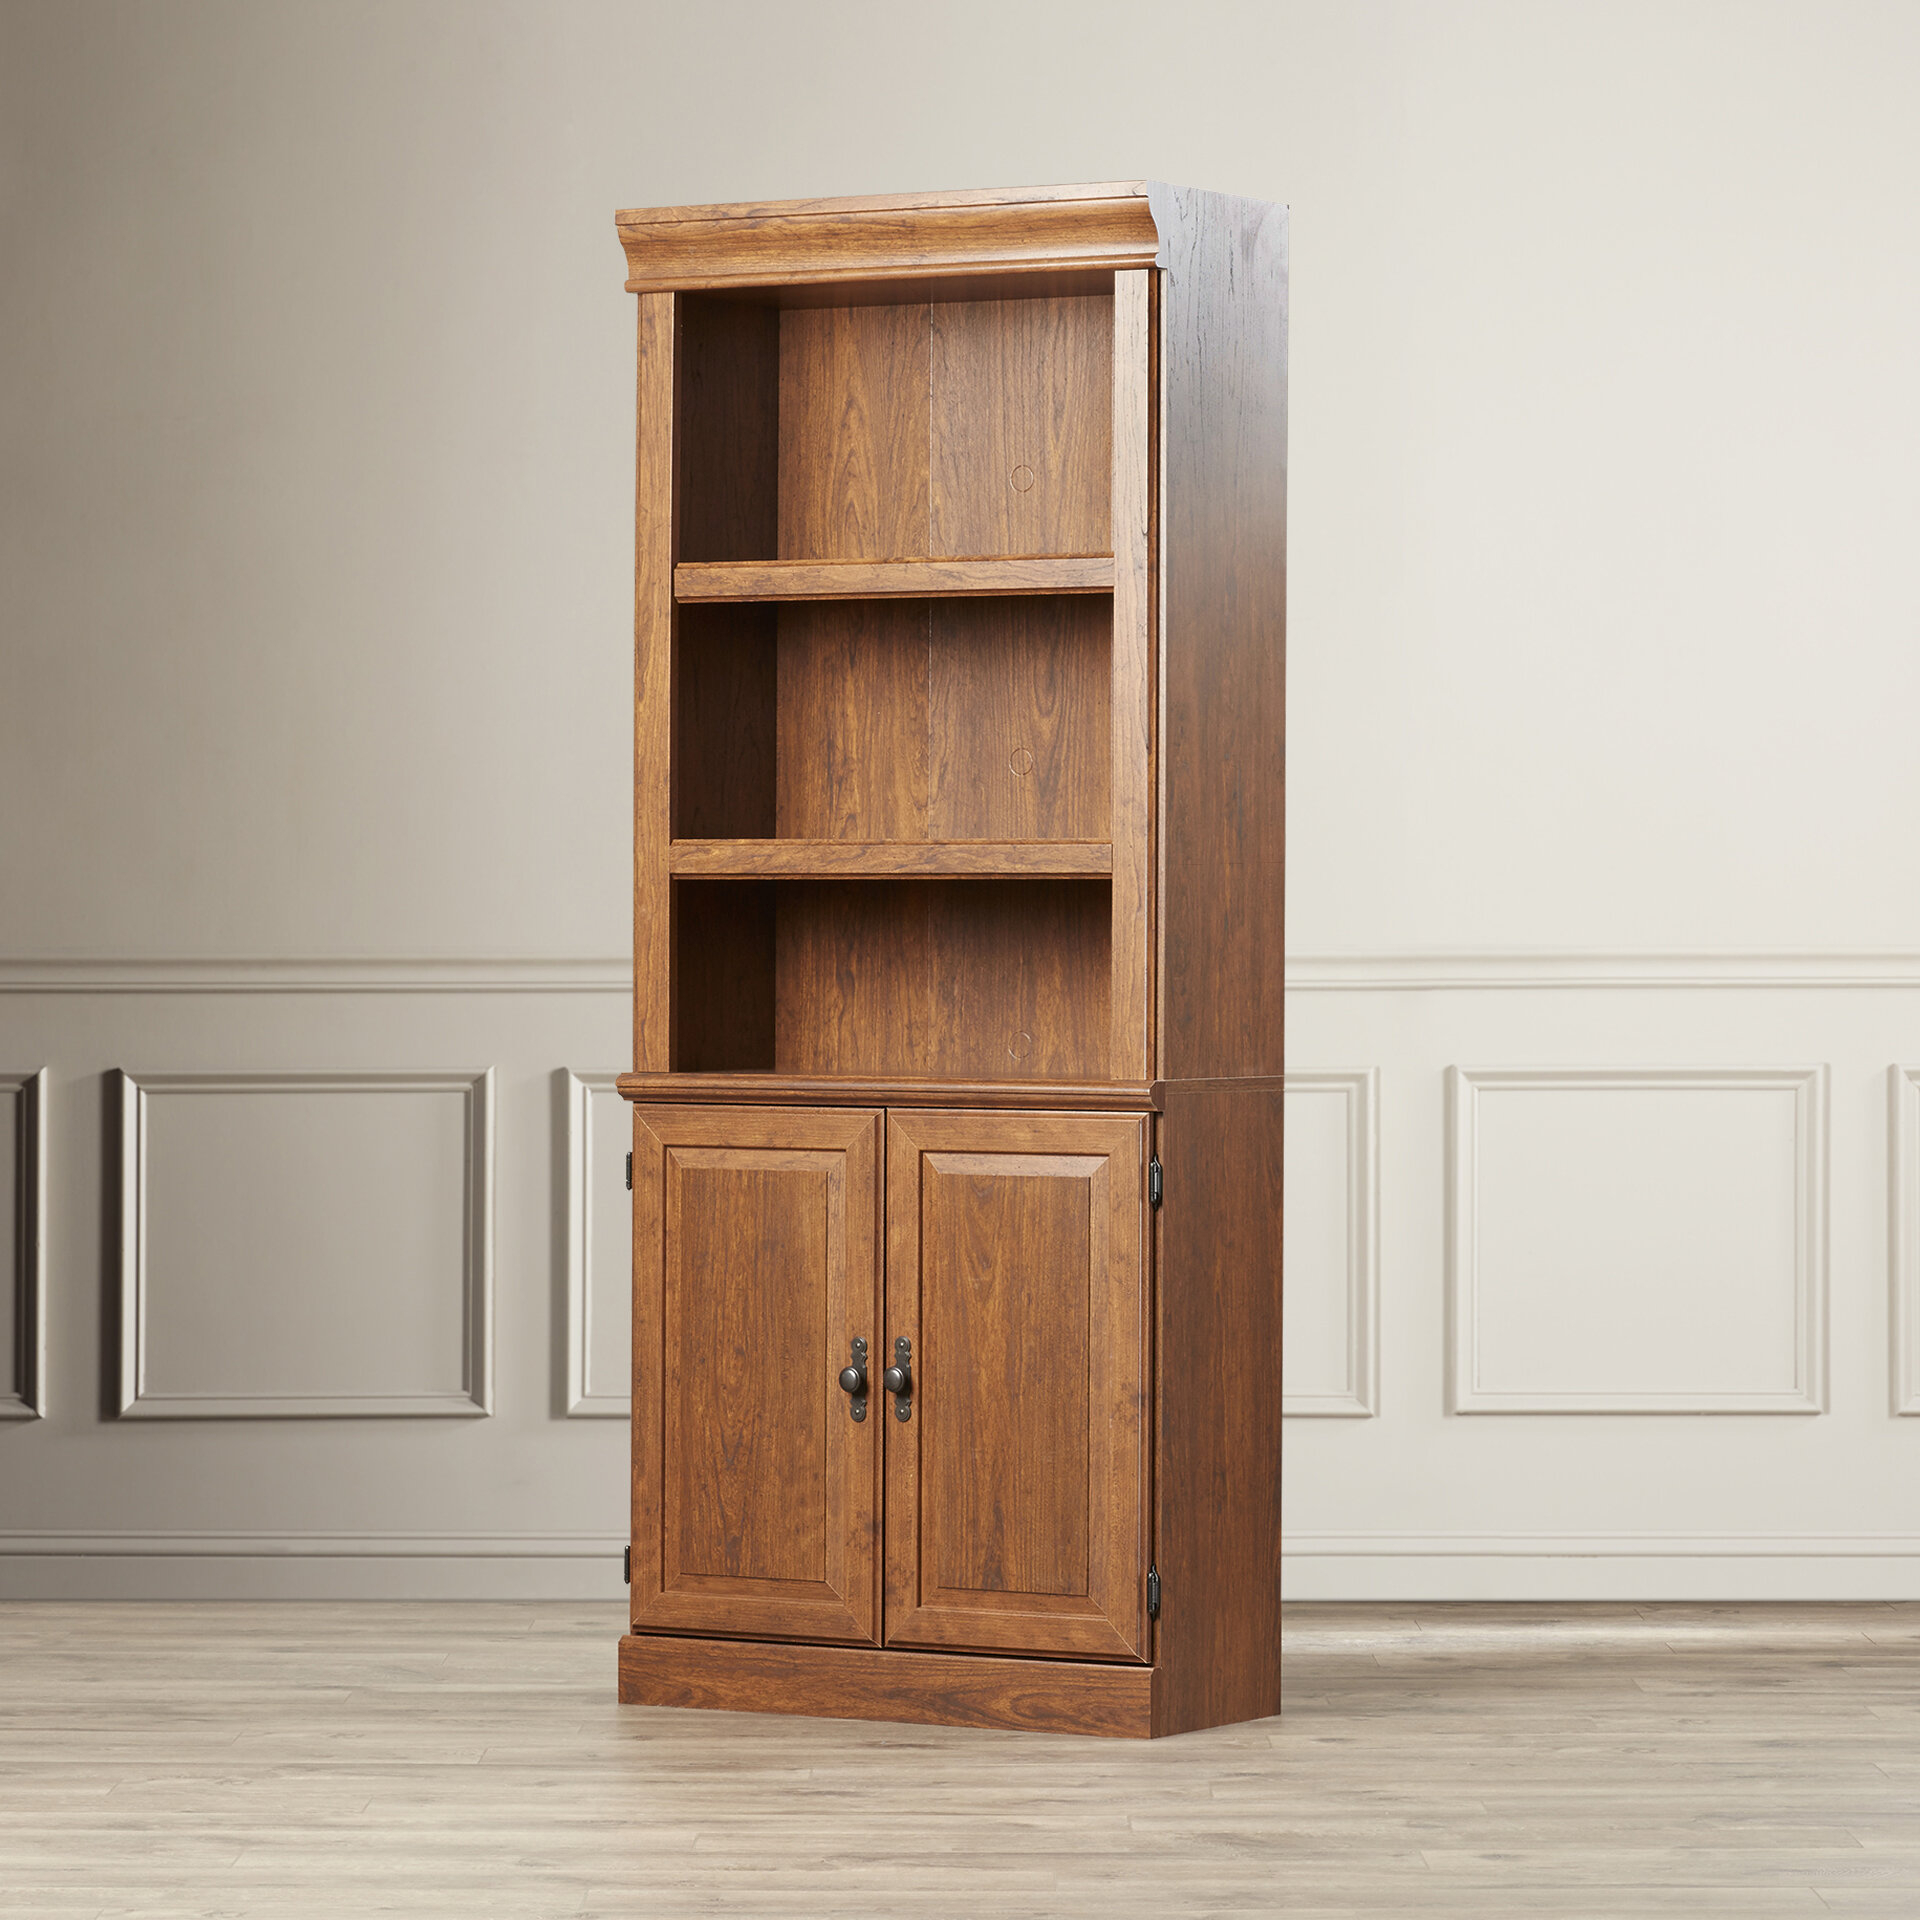 Medium Yellow Wood Bookcases With Doors Youll Love In 2019 intended for proportions 1920 X 1920